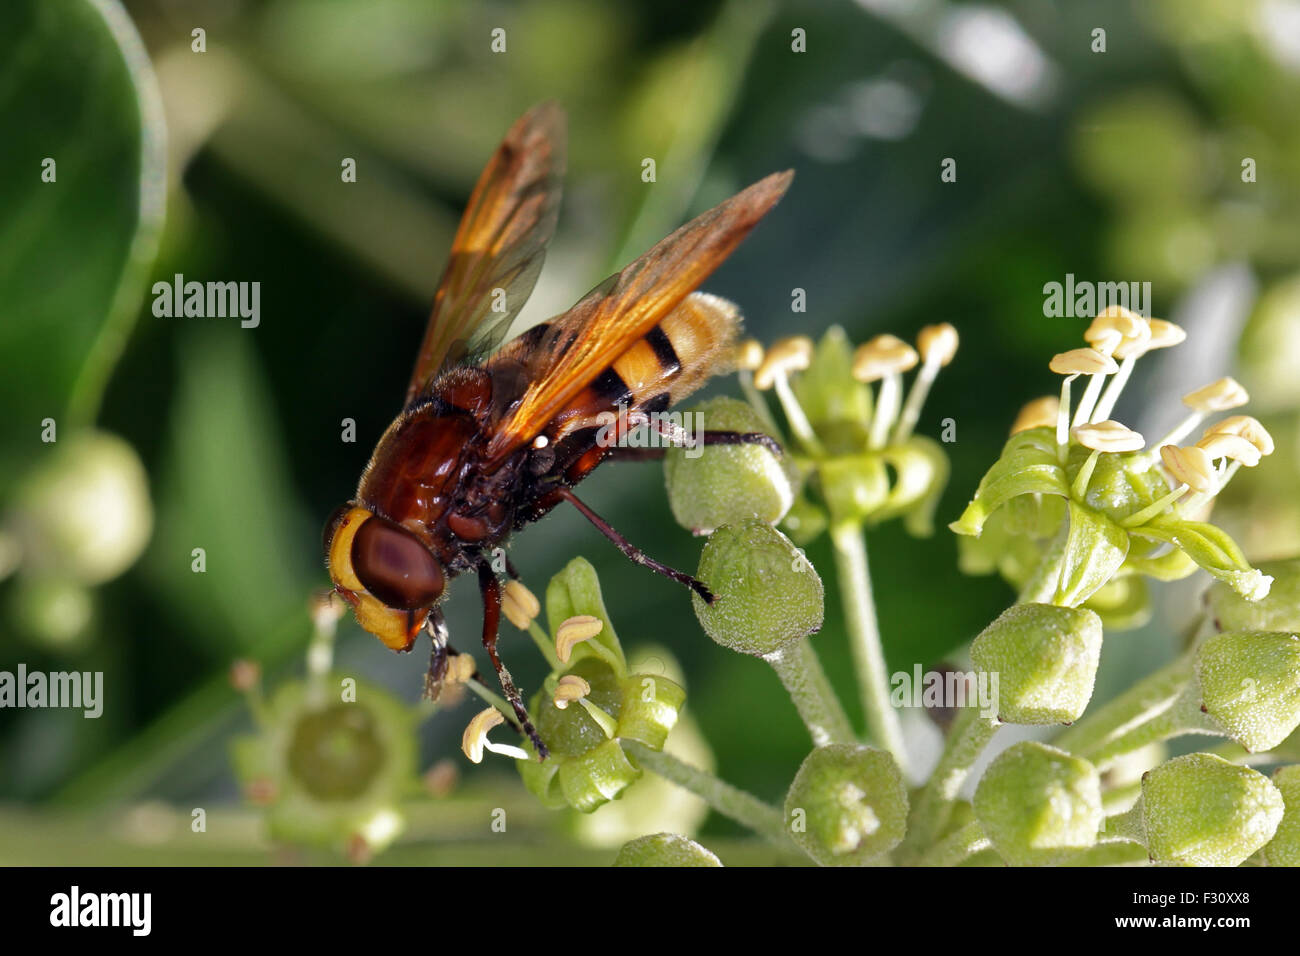 Close-up, macro photo of a Wasp feeding on an Ivy flower. Stock Photo